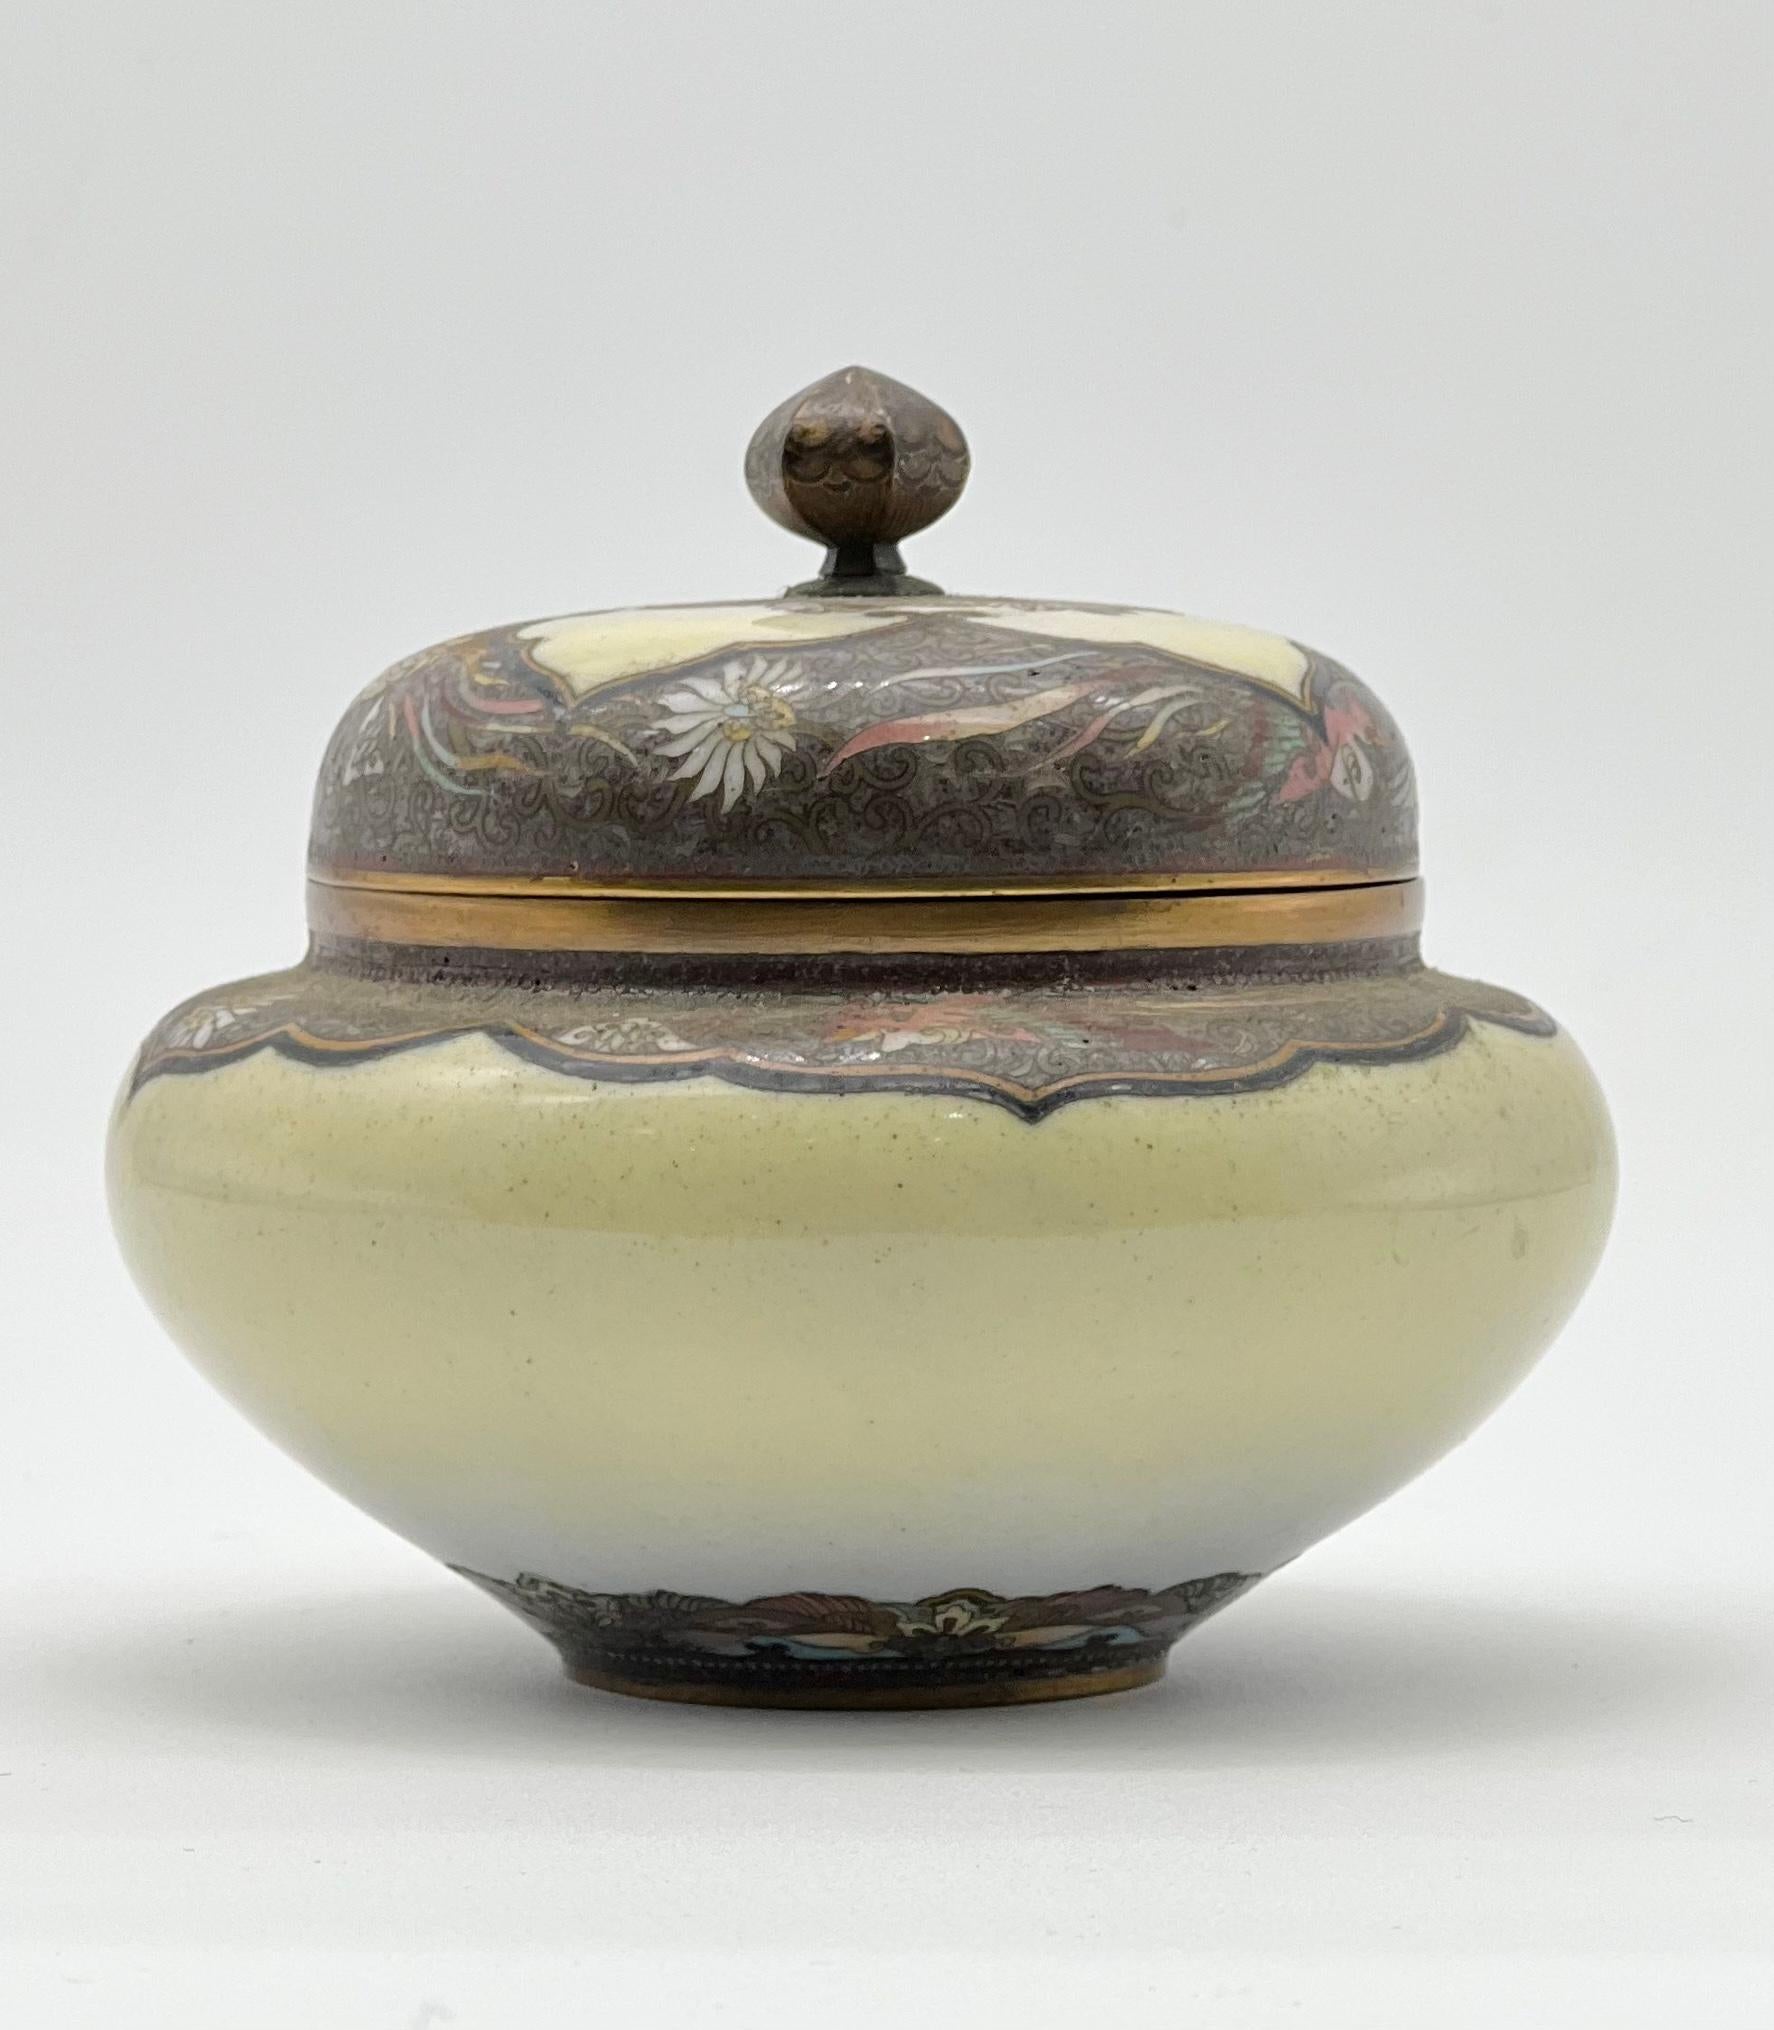 Exquisite Cloisonné Enamel Vase and Cover in the Manner of Namikawa Yasuyuki For Sale 1